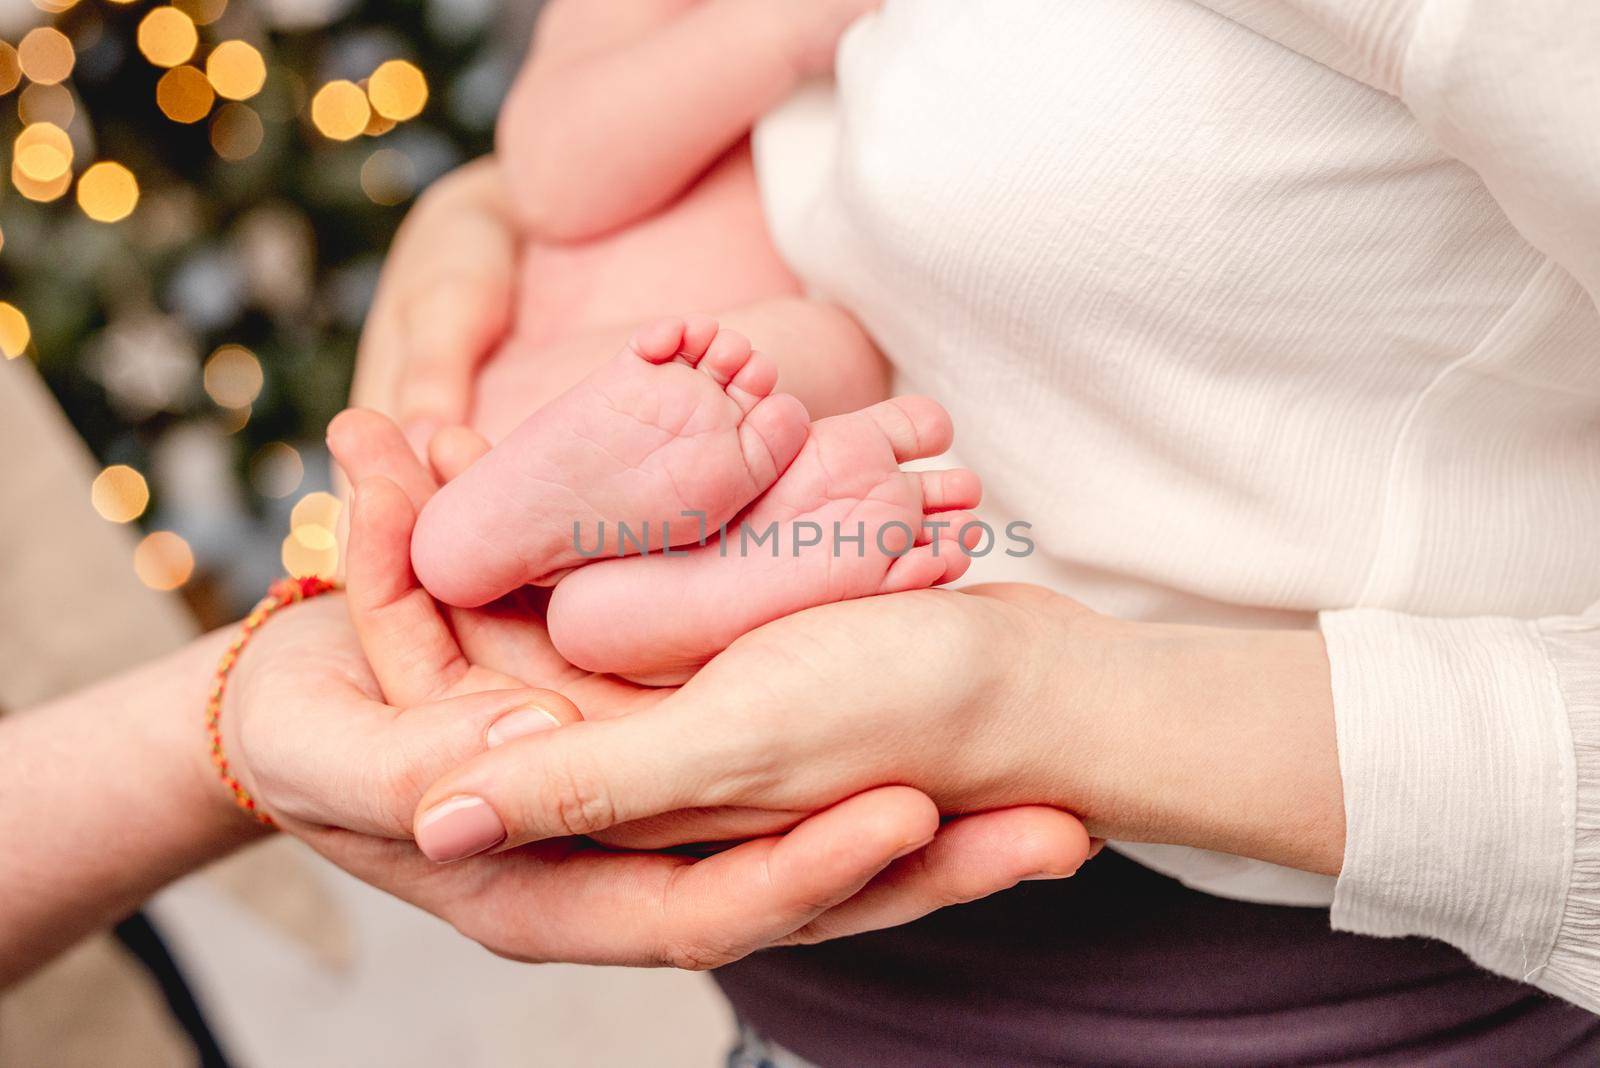 Bare feet of newborn baby surrounded by family members hands